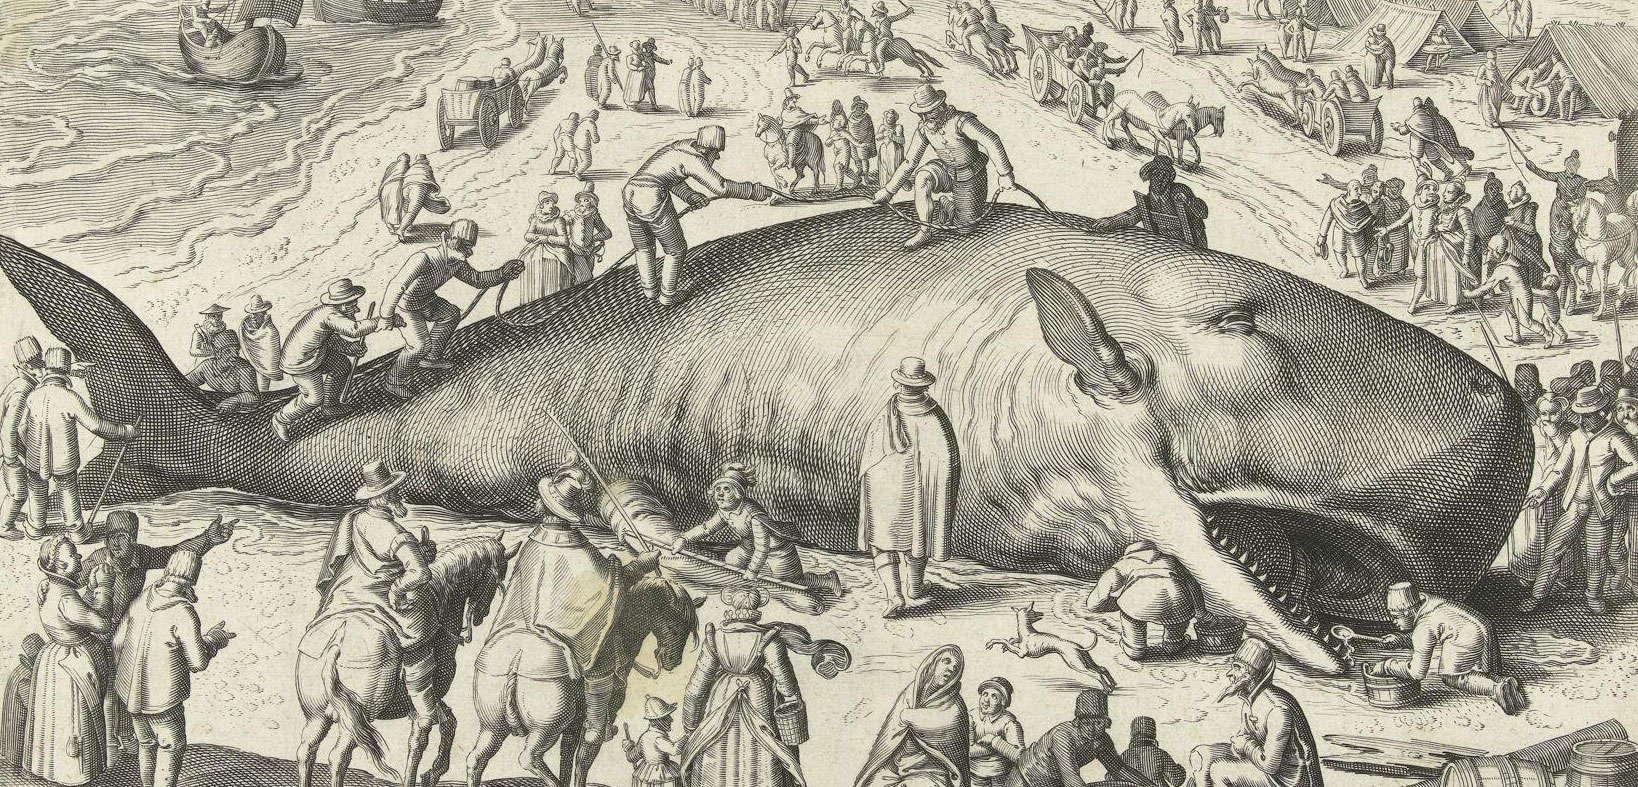 1600s illustration of a beached whale